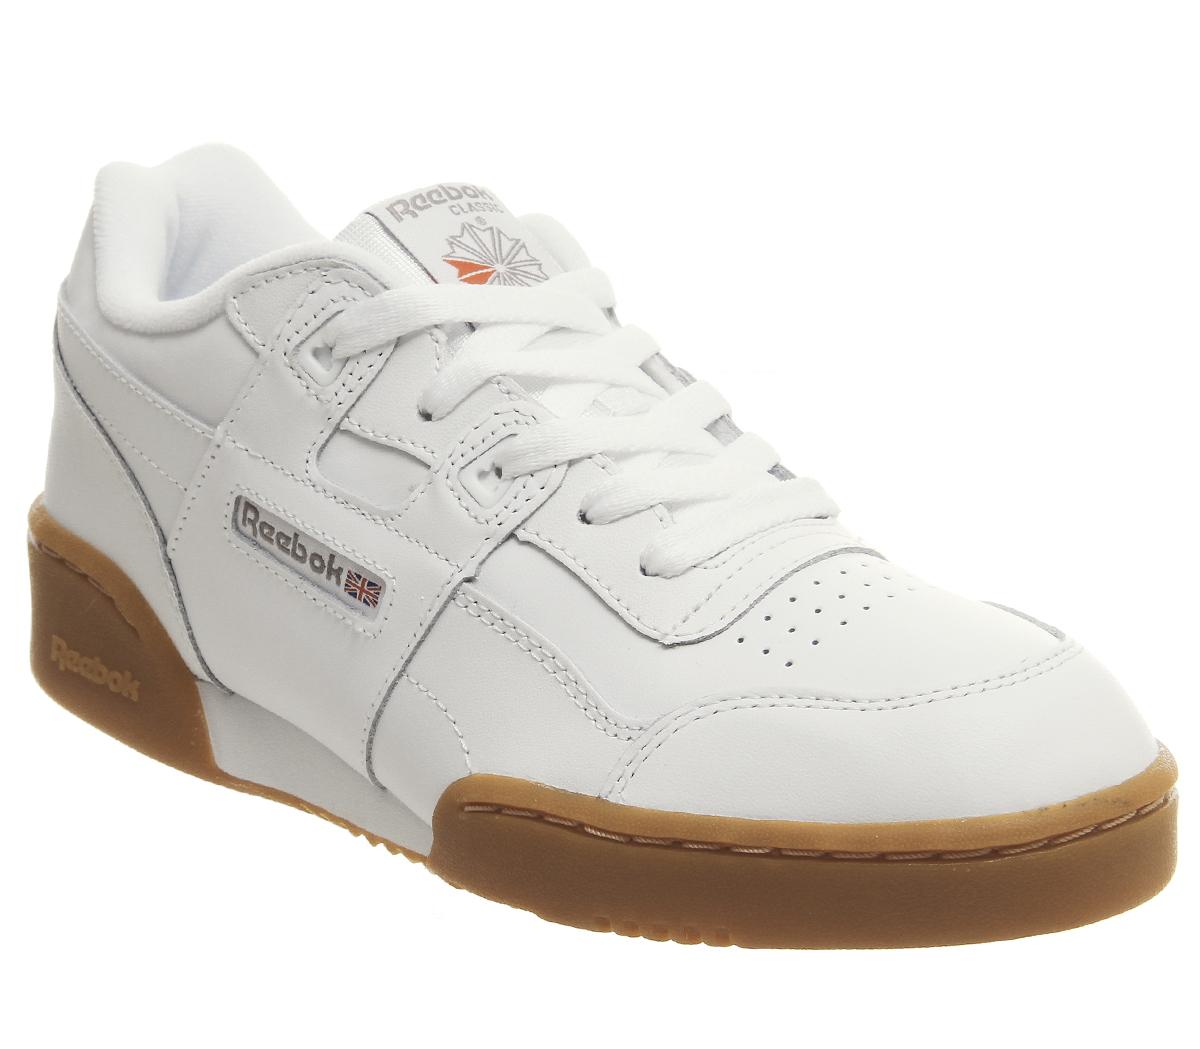 Reebok Workout Gs Trainers White Gum 